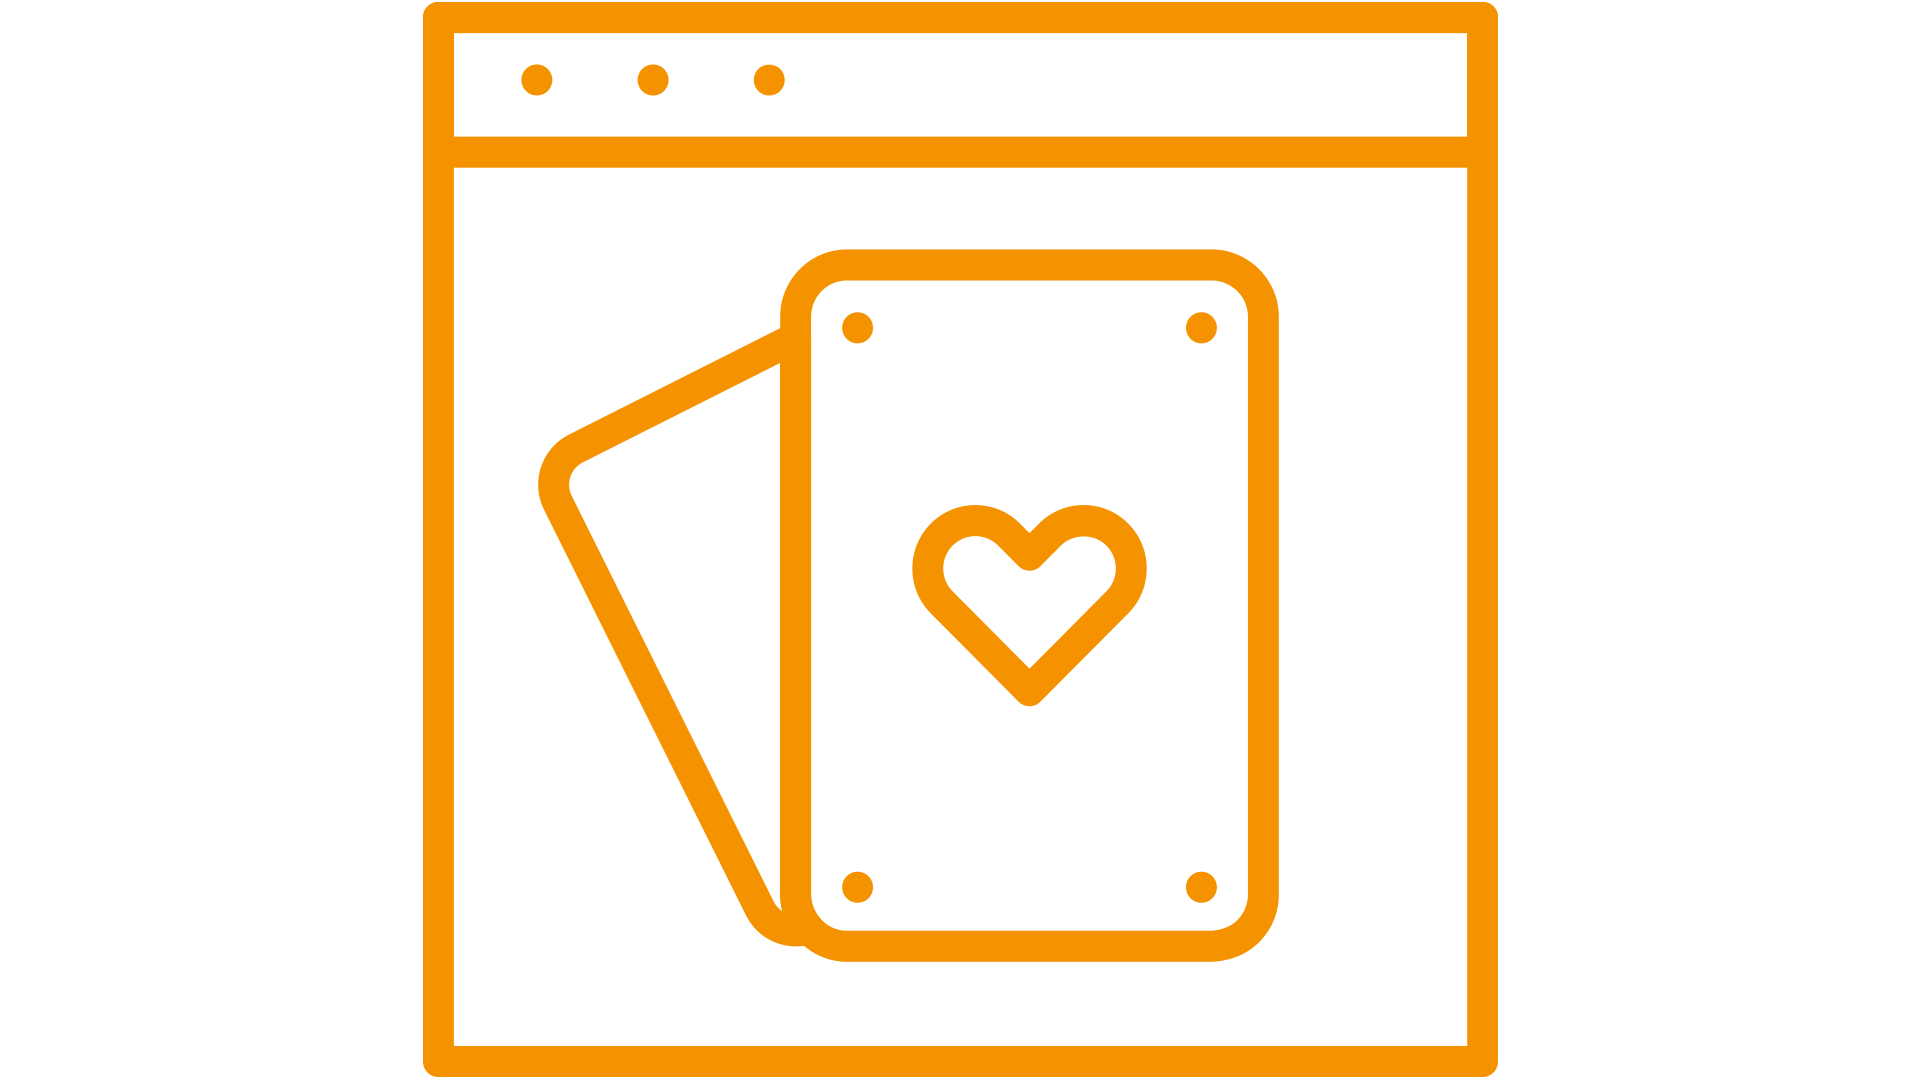 pictogram of a gaming- cards